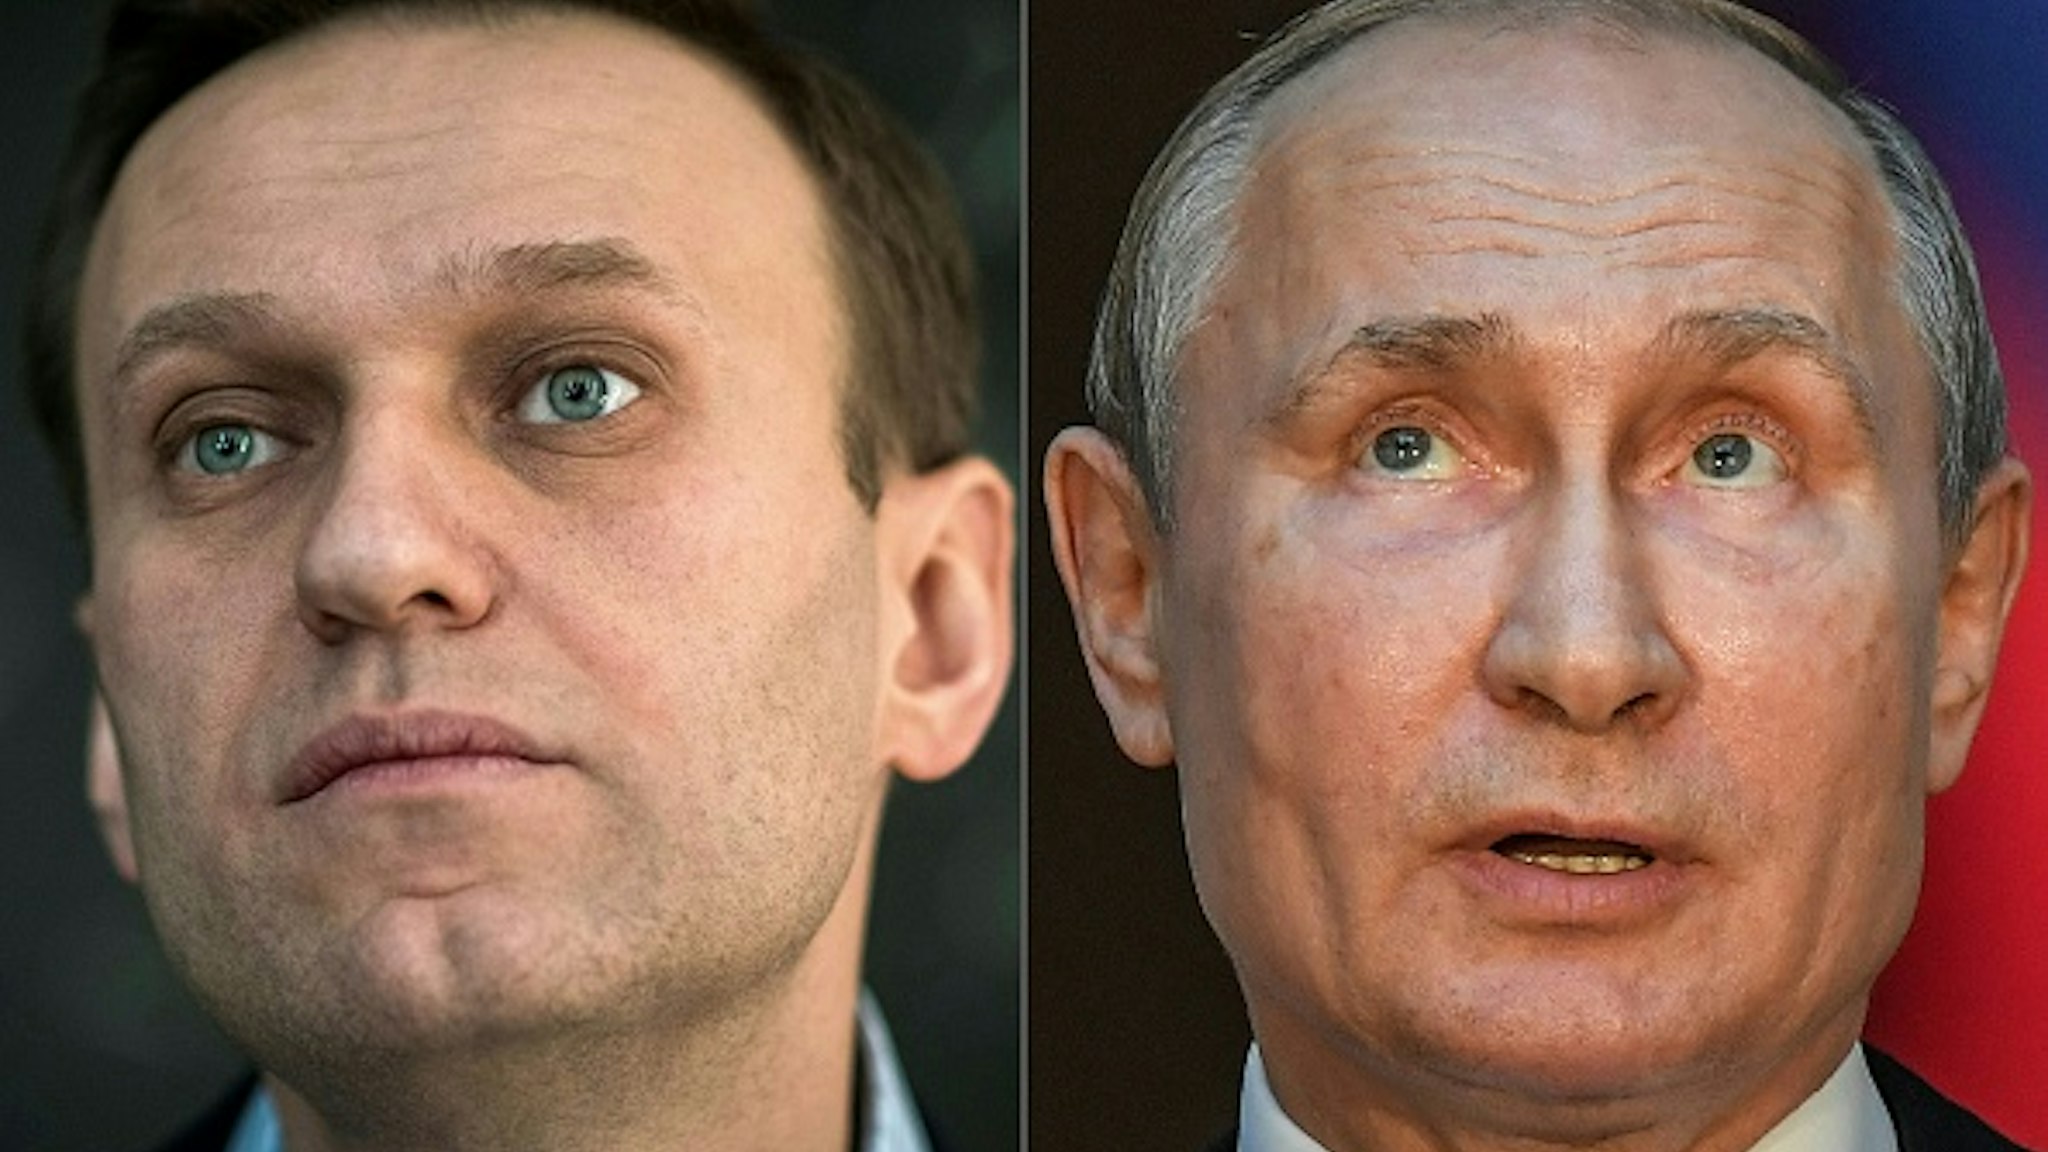 (COMBO) This combination of pictures created on October 1, 2020 shows Russian opposition leader Alexei Navalny (L, on January 16, 2018 in Moscow) and Russian President Vladimir Putin (on July 4, 2019 in Rome). - Russian opposition leader Alexei Navalny has accused President Vladimir Putin of being behind his poisoning, in his first interview published since he left the German hospital where he was treated. "I assert that Putin is behind this act, I don't see any other explanation," he told the German weekly Der Spiegel, which published extracts from the interview on its website Thursday, October 1, 2020.